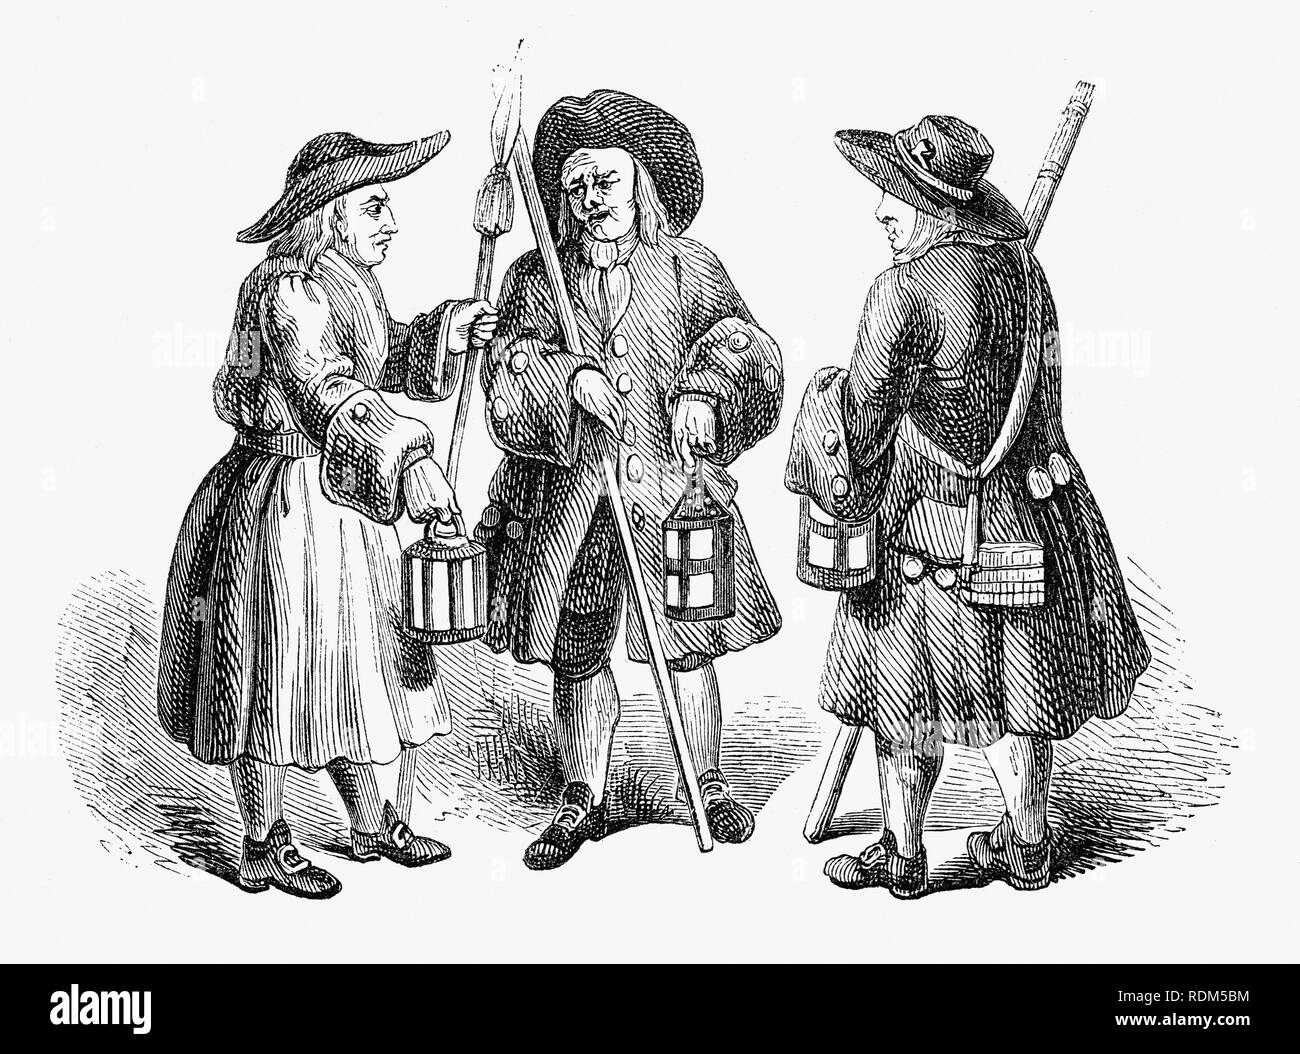 The 18th Century Watchmen were organized groups of men, usually authorized by a state, government, city, or society, to deter criminal activity and provide law enforcement as well as traditionally perform the services of public safety, fire watch, crime prevention, crime detection, recovery of stolen goods. Watchmen have existed since earliest recorded times in various guises throughout the world and were generally succeeded by the emergence of formally organized professional policing. Stock Photo